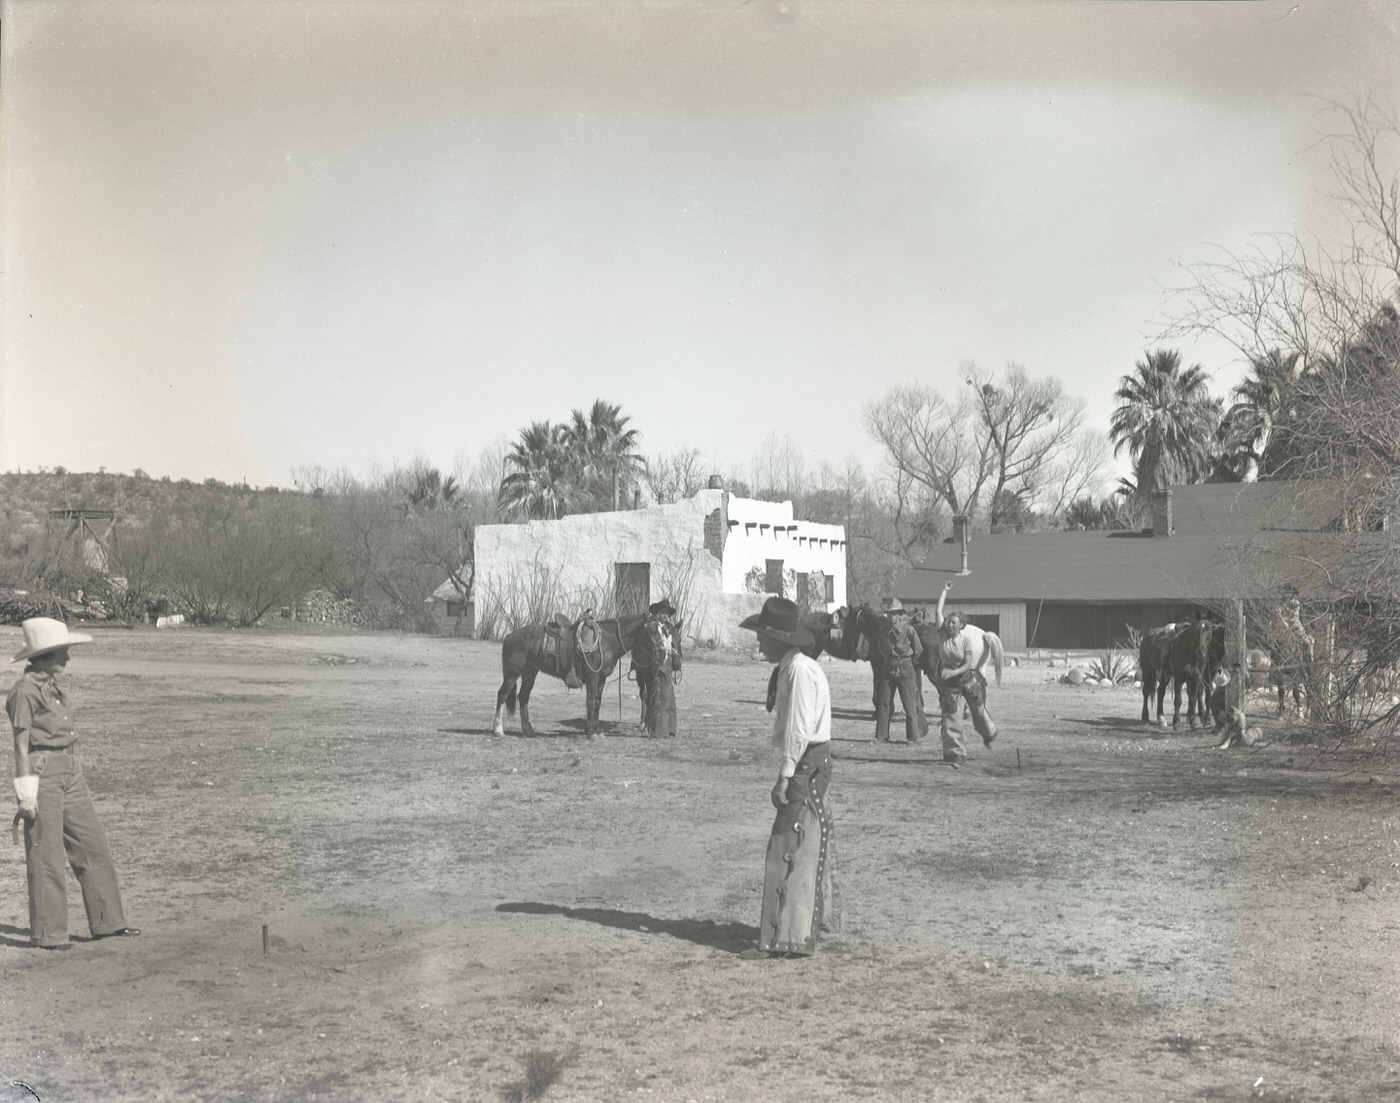 Lazy R C Ranch Guests on Horseback, 1930s